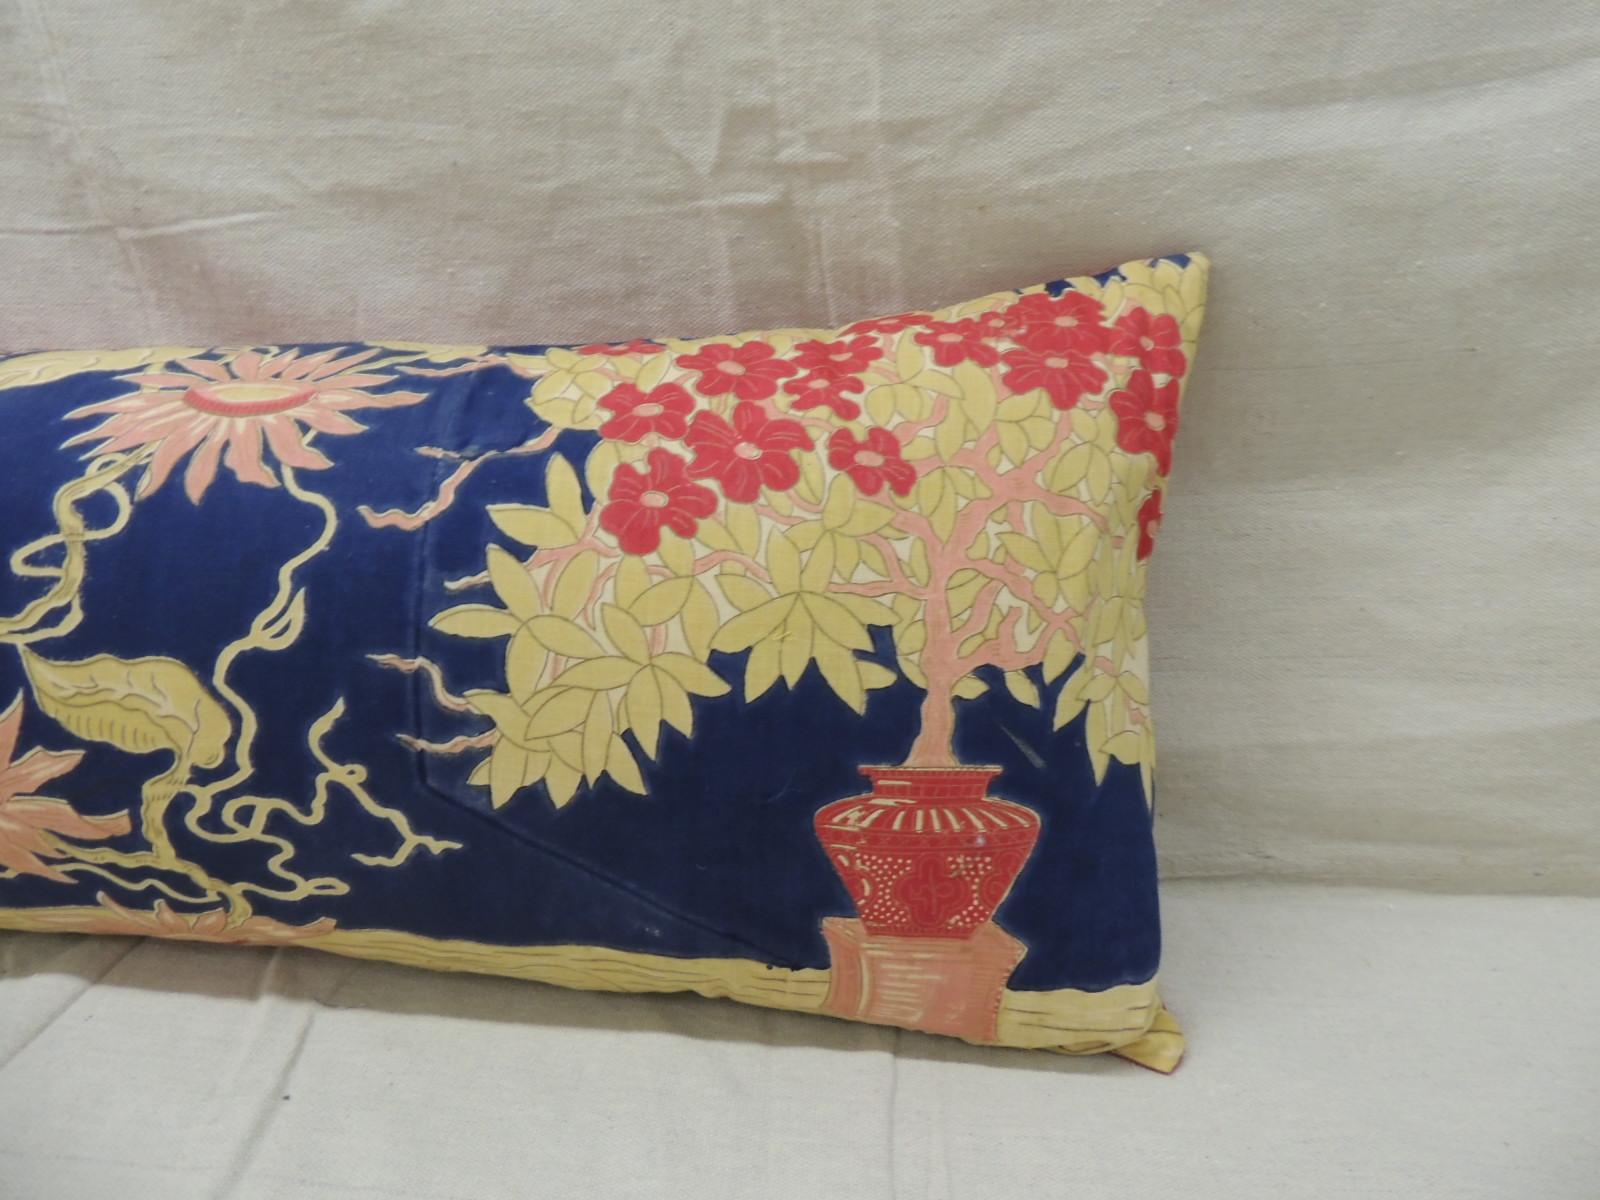 Antique yellow and blue Indian peacock long bolster decorative pillow.
Depicting peacock and tree of life.
Pink texture linen backing.
Decorative pillow handcrafted and designed in the USA.
Closure by stitch (no zipper closure) with custom made